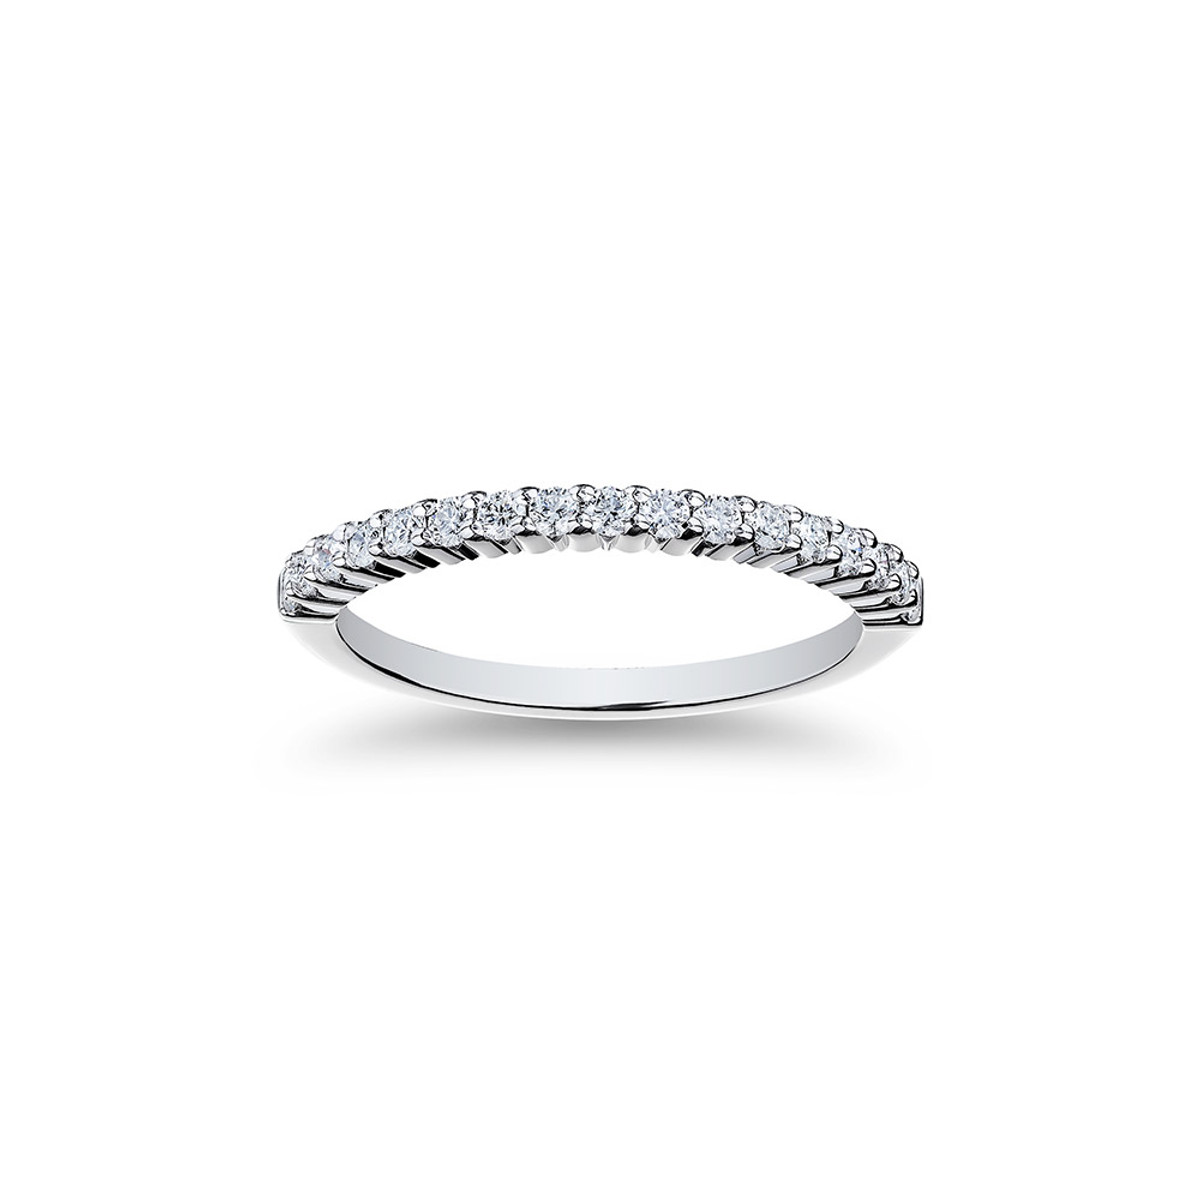 Hyde Park Collection 18K White Gold Diamond Band-28234 Product Image